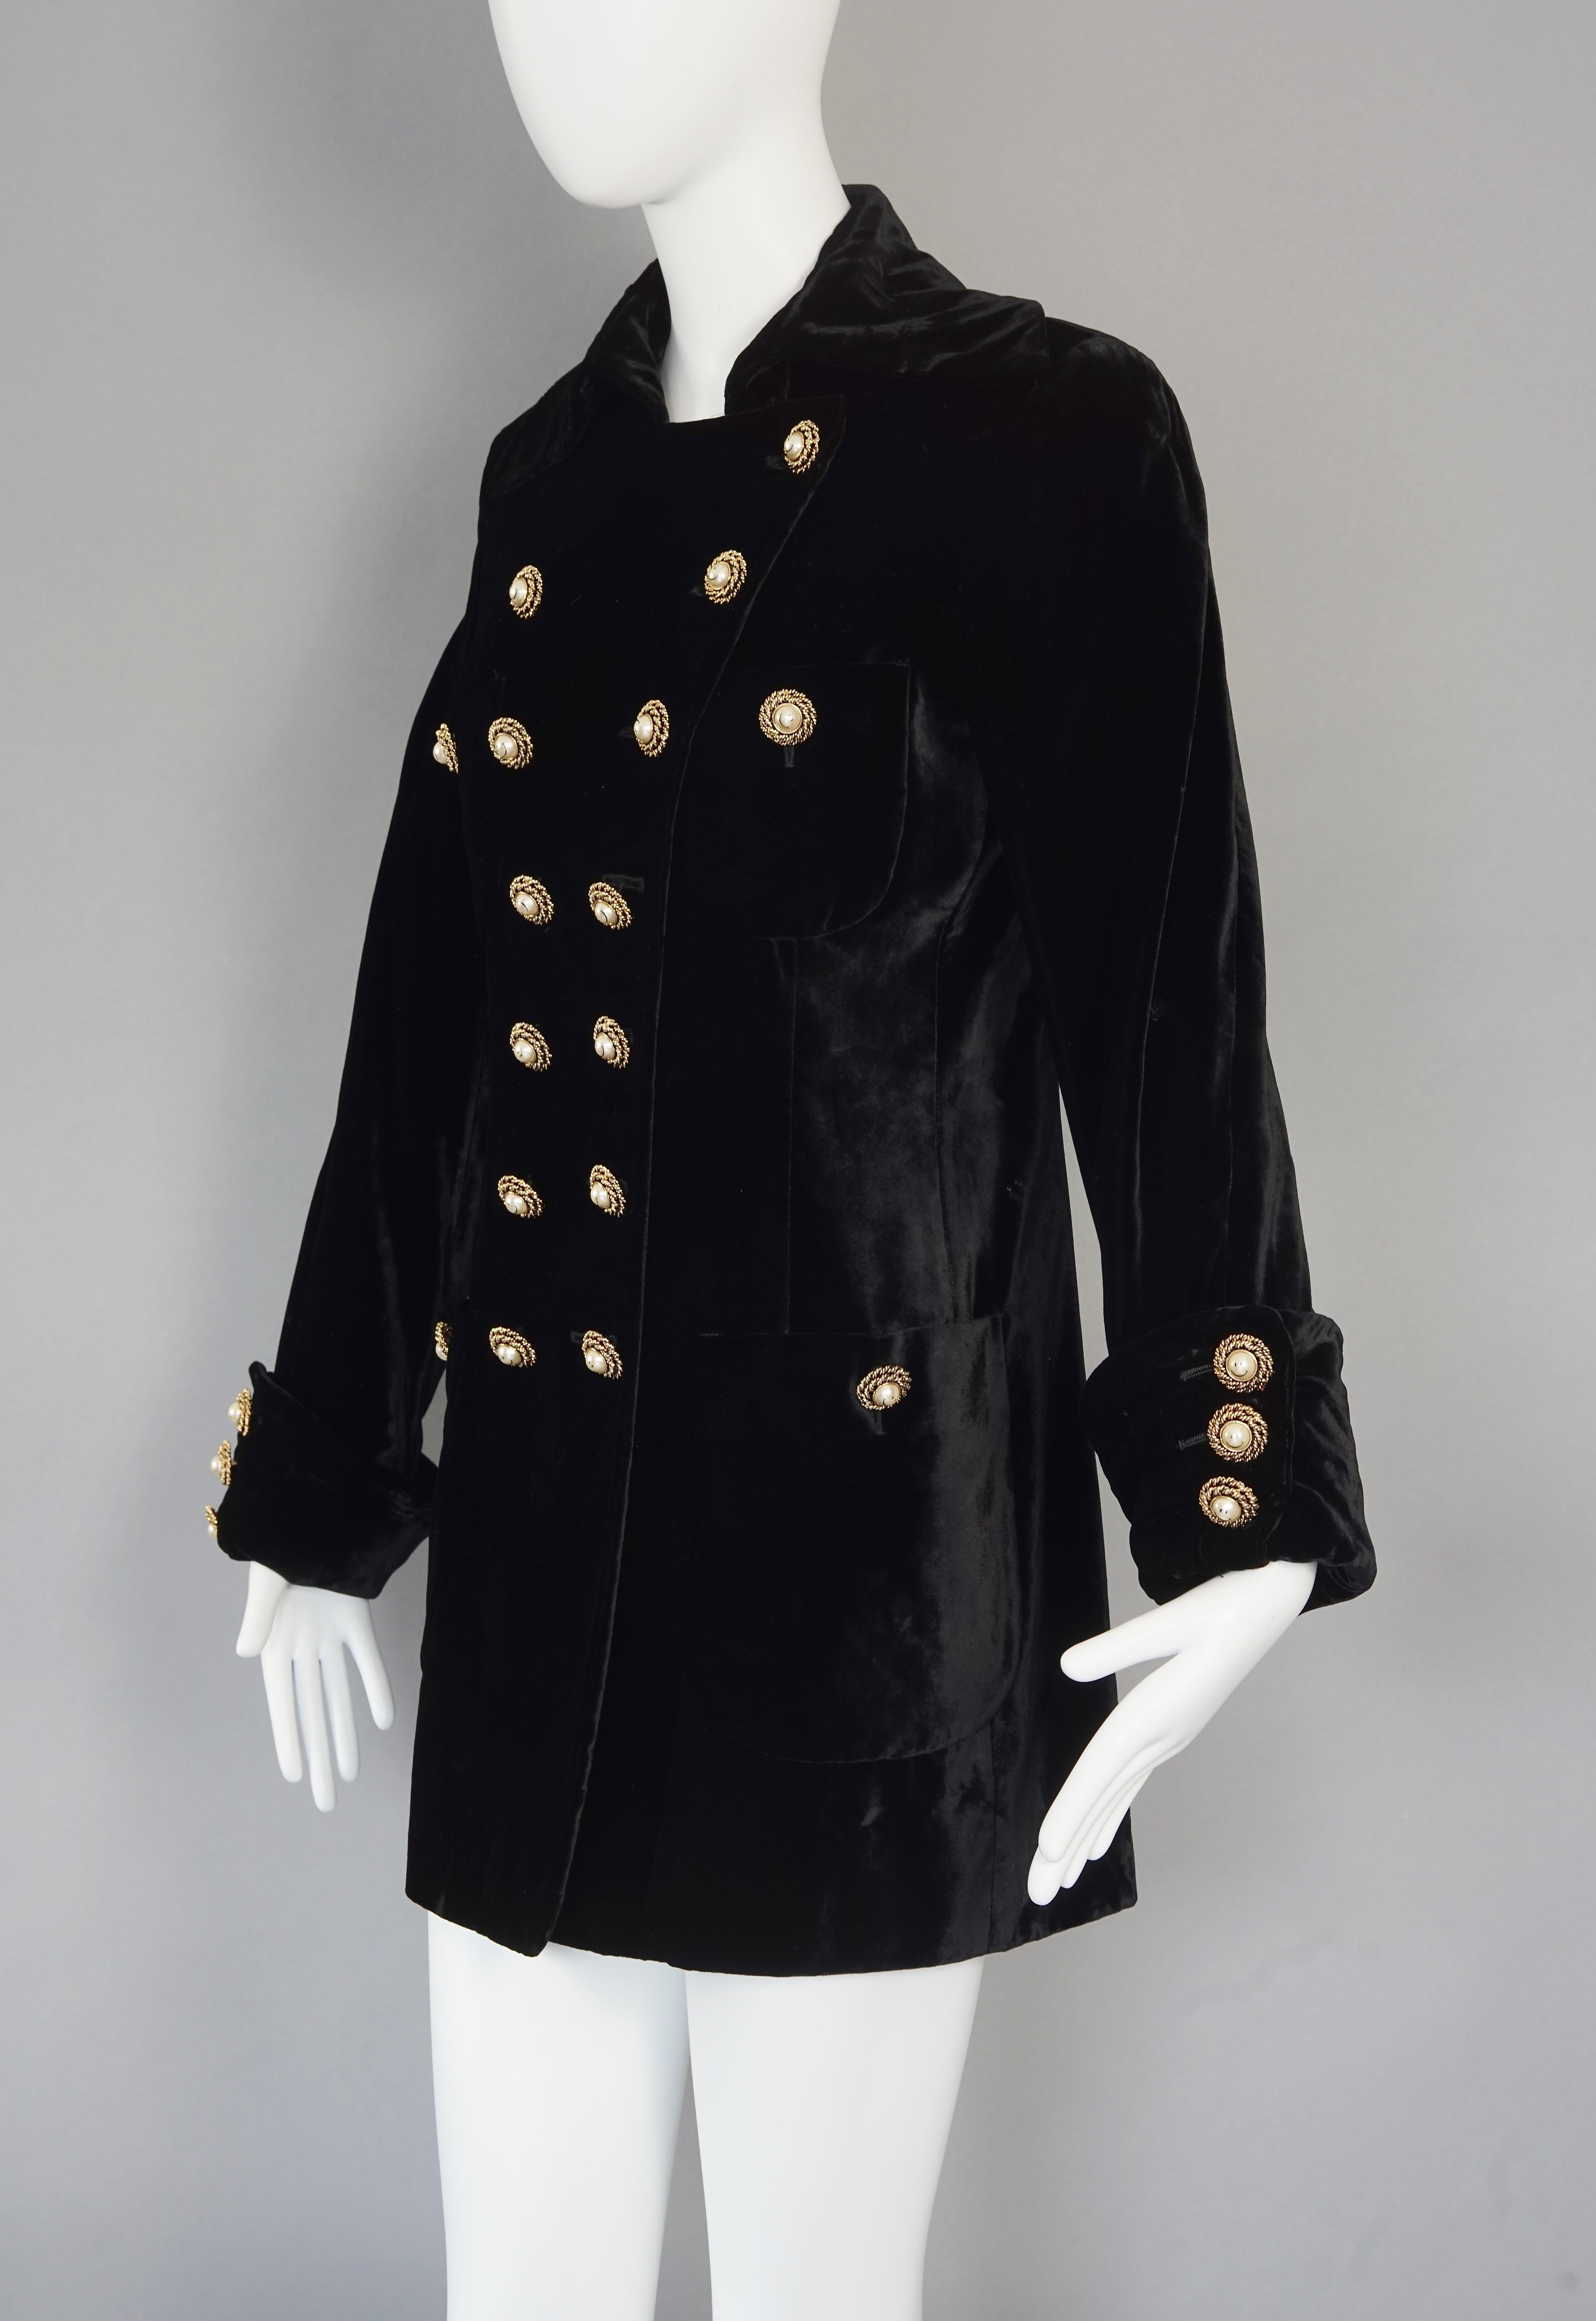 Vintage MOSCHINO COUTURE Pearl Smiley Face Buttons Black Velvet Novelty Jacket In Good Condition For Sale In Kingersheim, Alsace